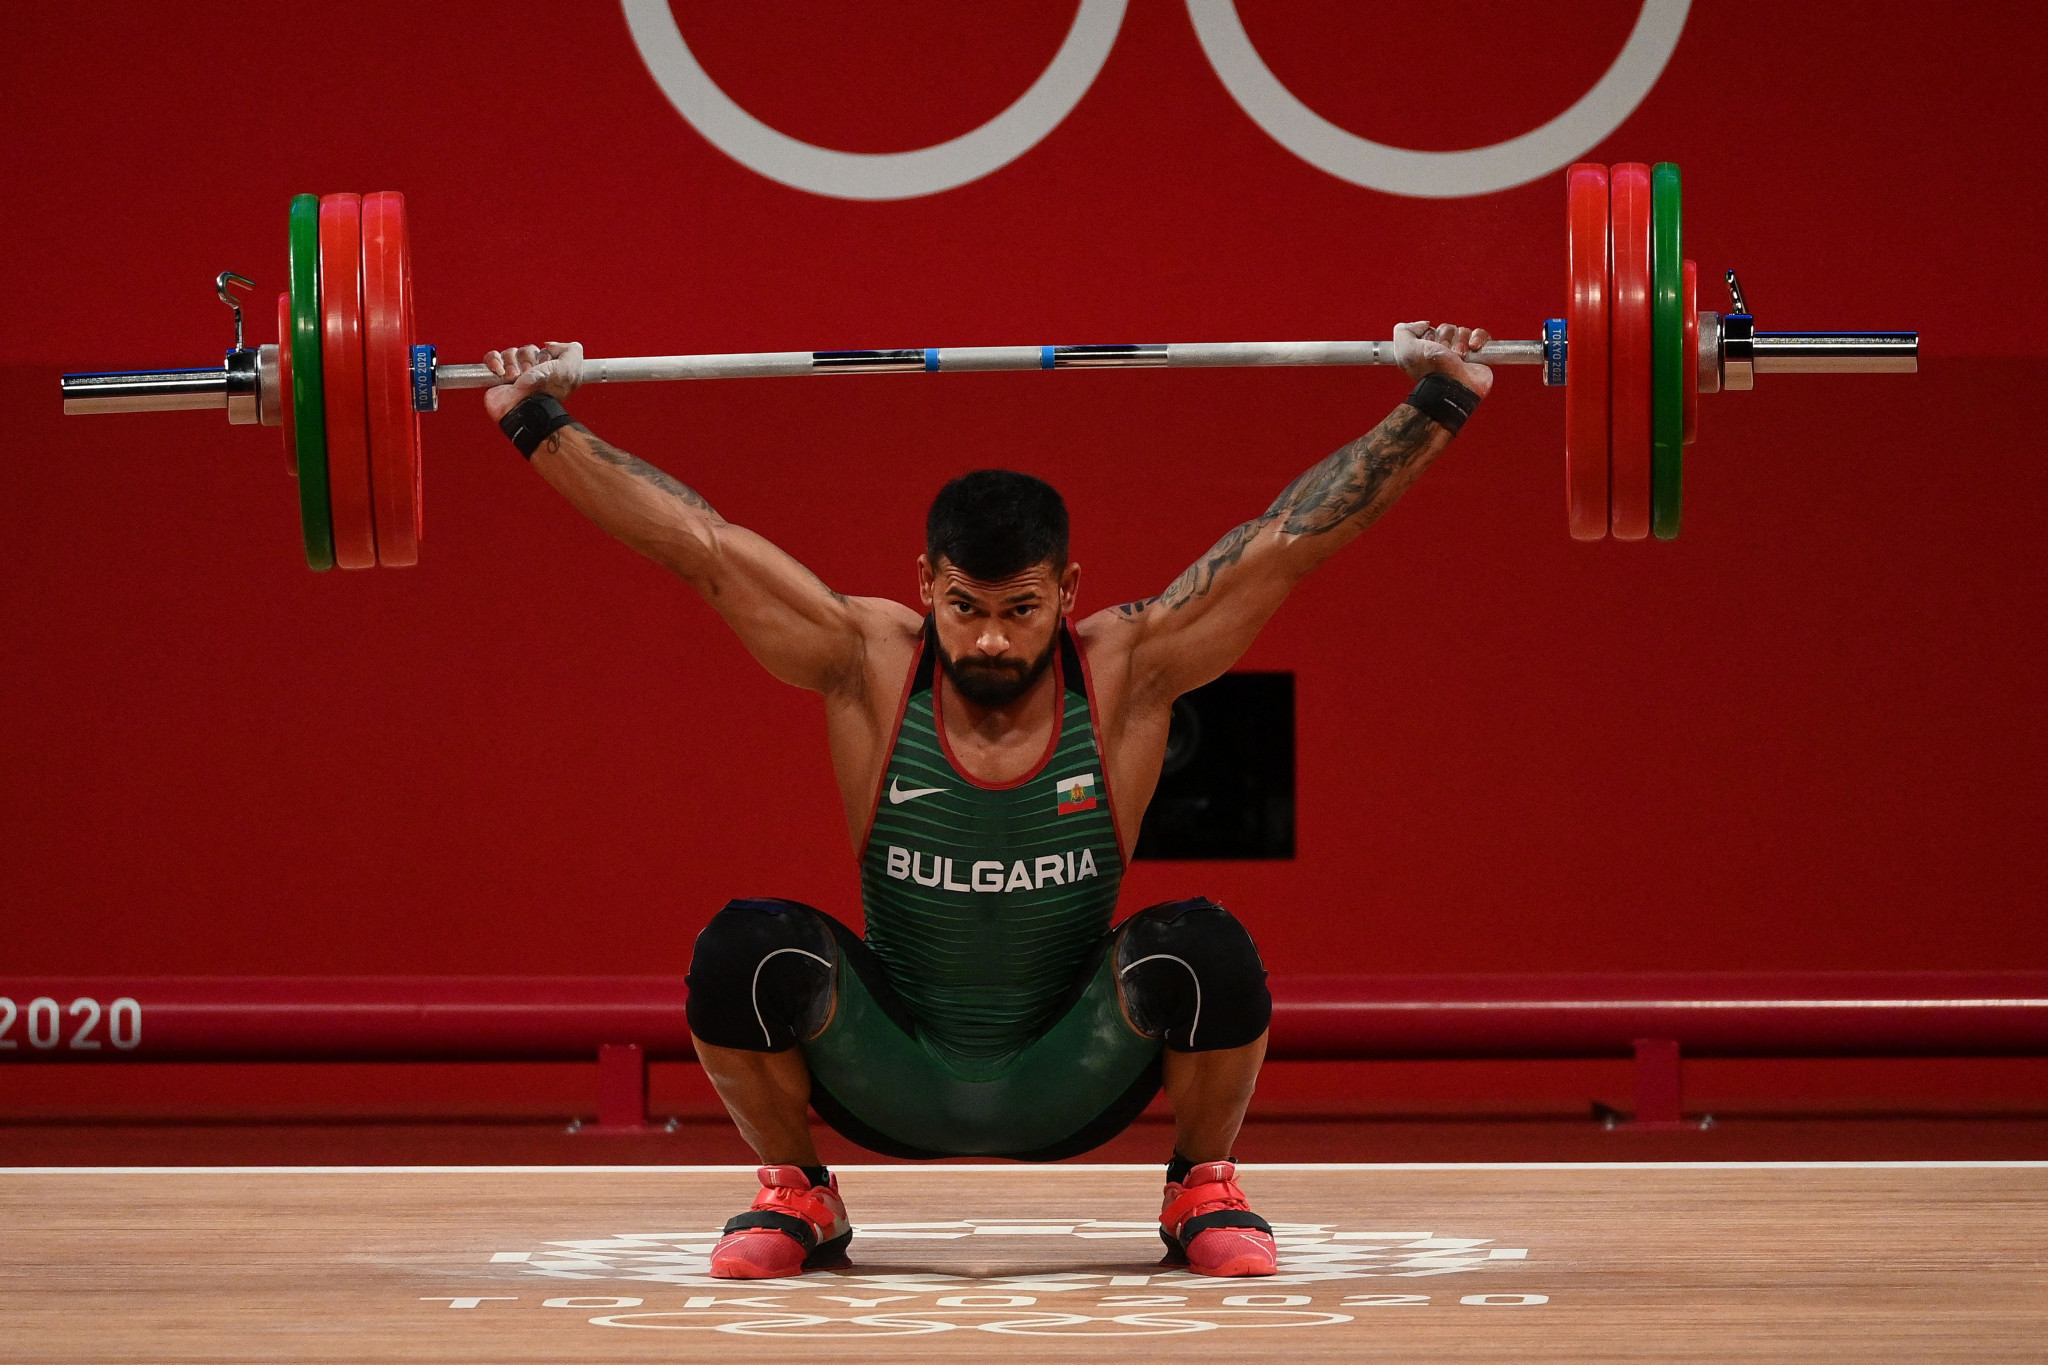 Bulgaria finished second in the 2021 European Weightlifting Championships in Moscow, but failed to win a medal at the Tokyo 2020 Olympics